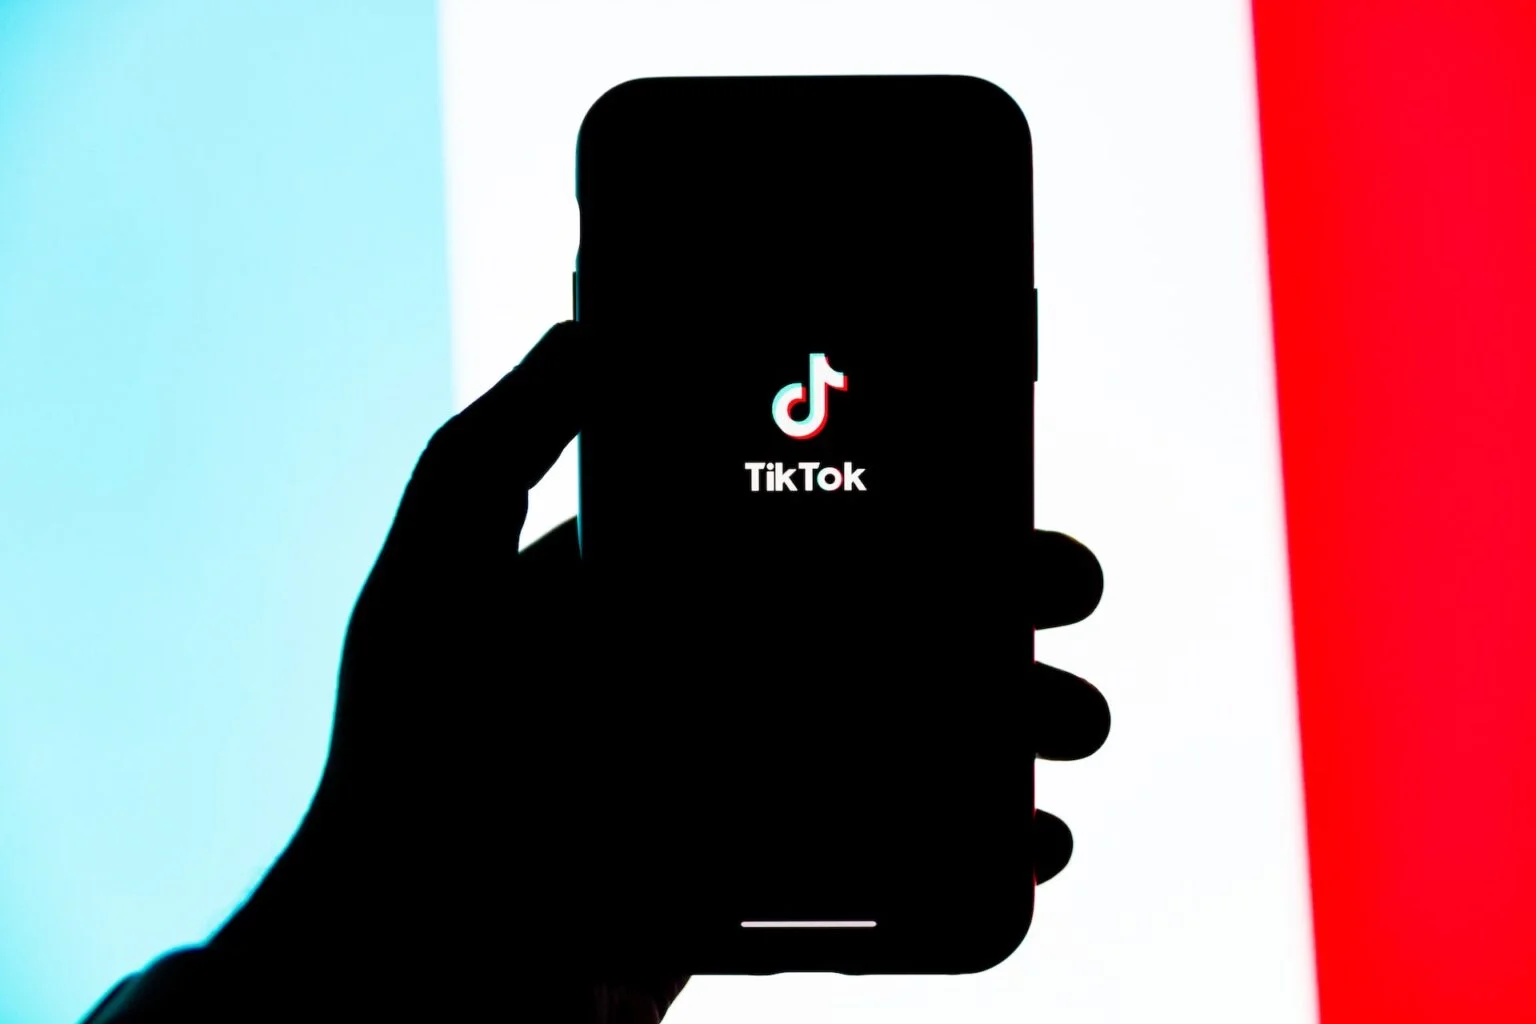 Hackers stole TikTok's source code and massive amount of user data